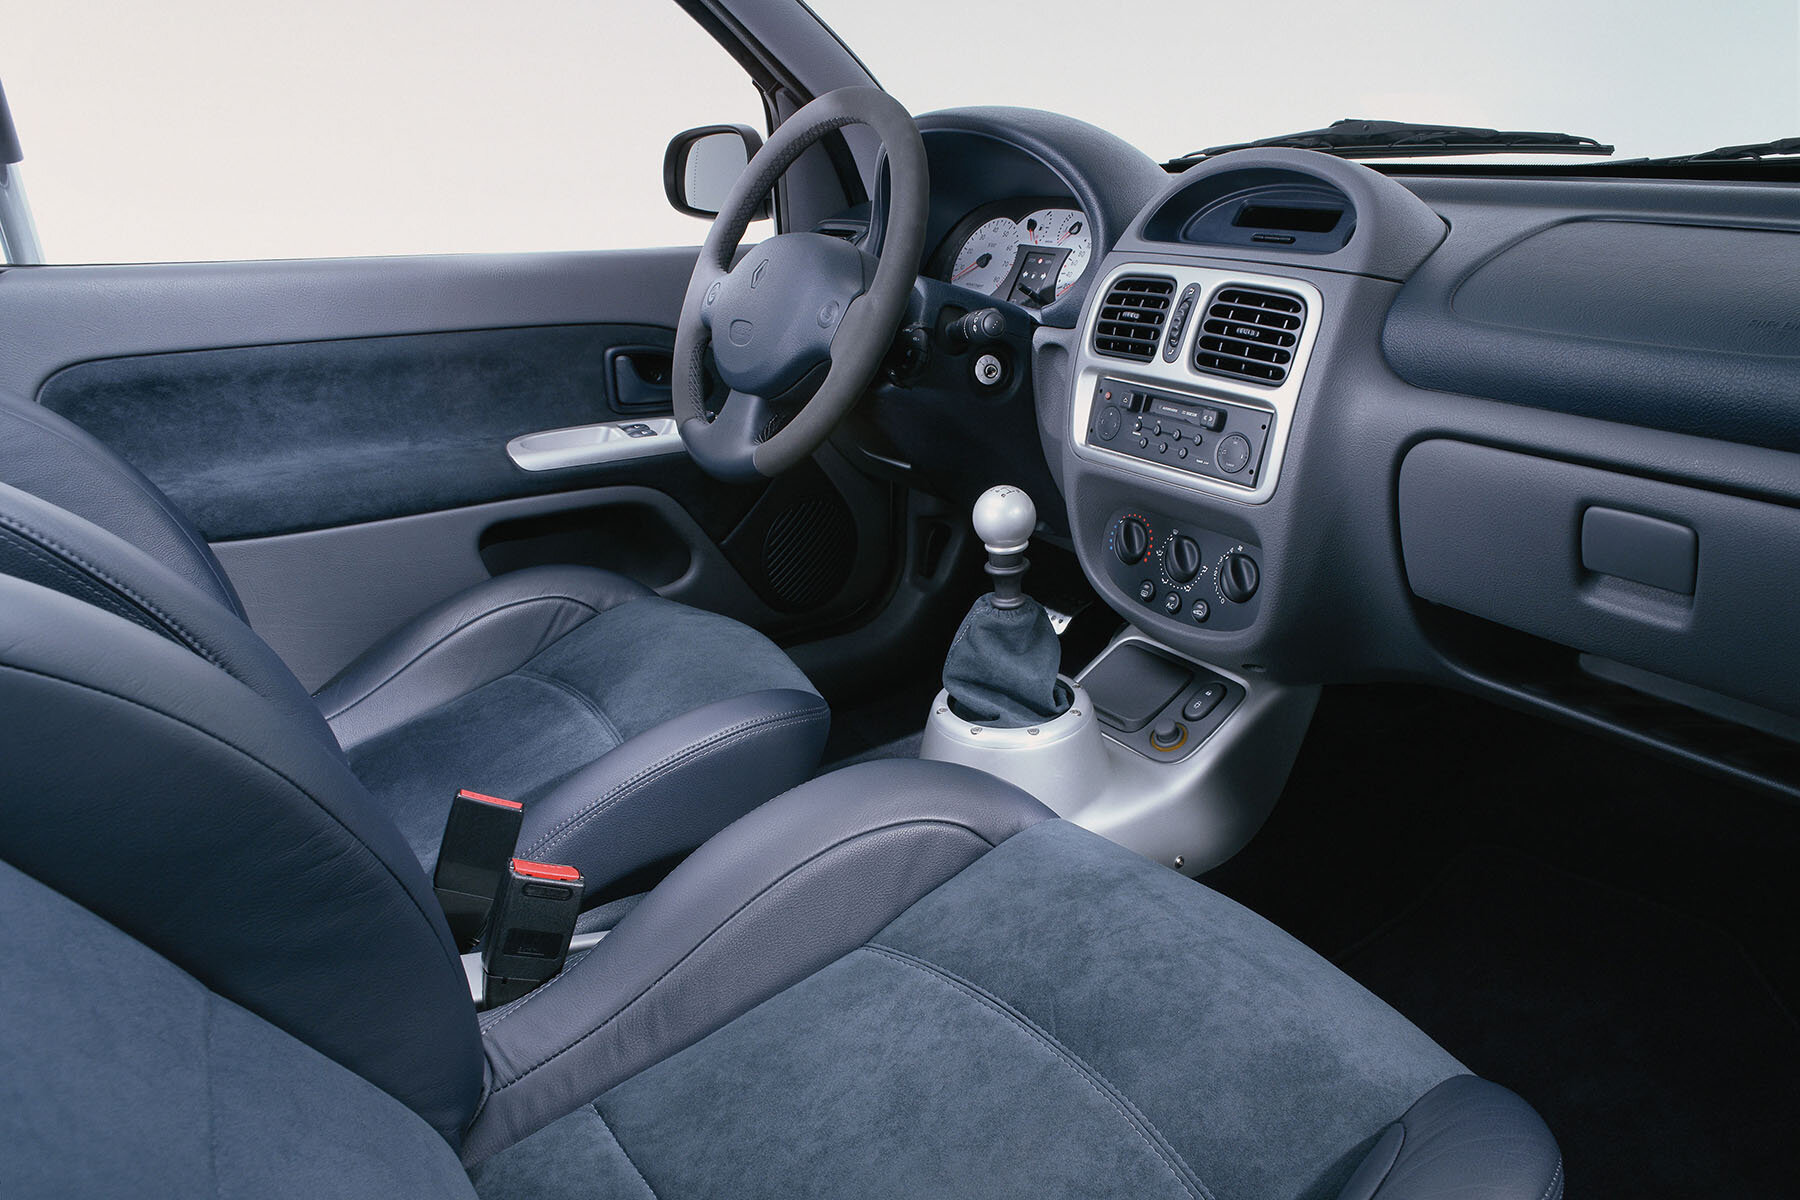 The Clio’s interior isn’t that special, until you turn around and look behind you.